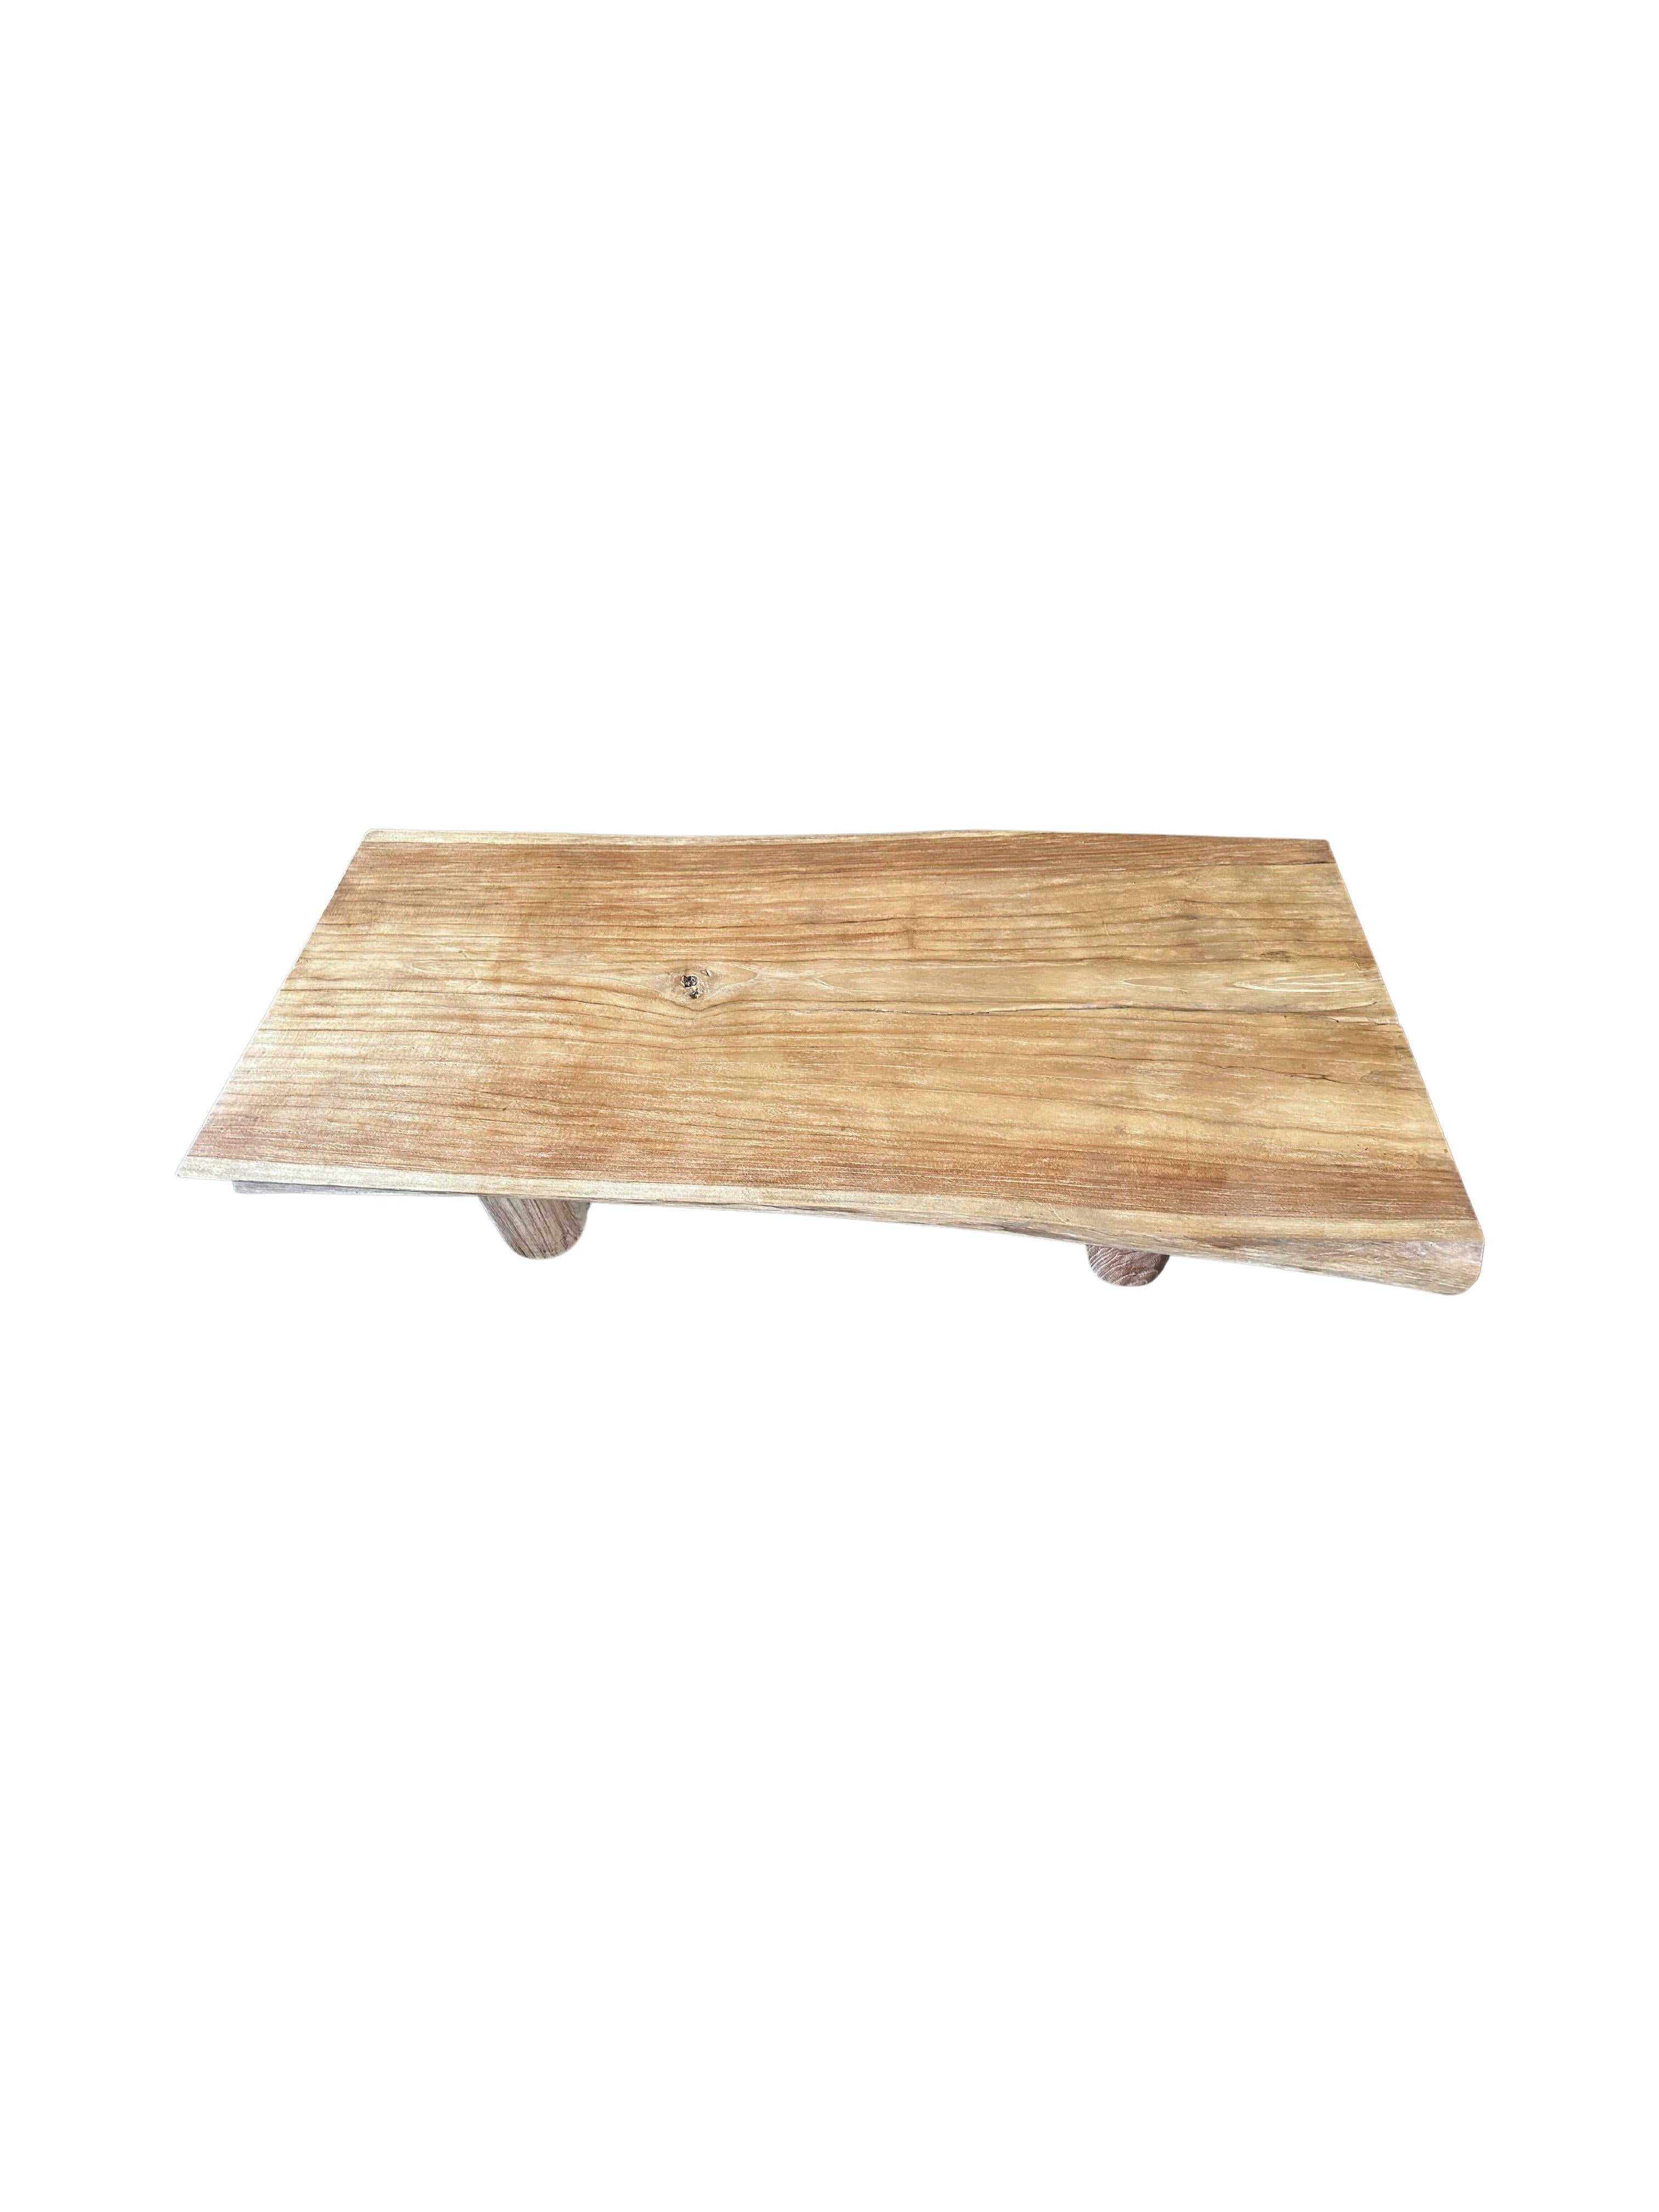 Hand-Crafted Solid Teak Wood Table Modern Organic For Sale